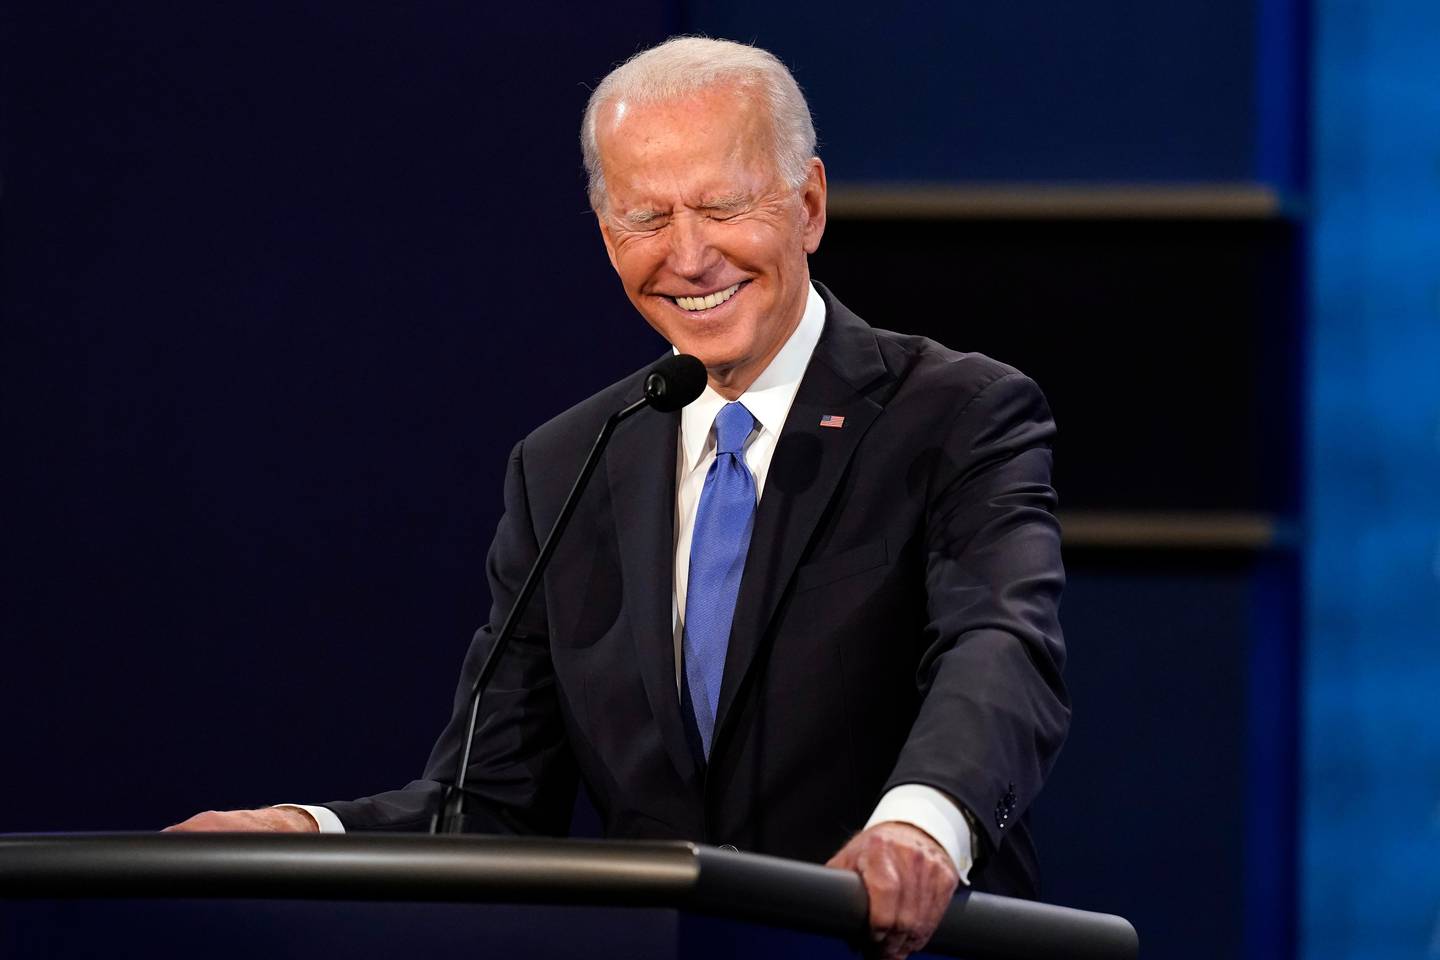 Democratic presidential candidate former Vice President Joe Biden laughs during the second and final presidential debate Thursday, Oct. 22, 2020, at Belmont University in Nashville, Tenn., with President Donald Trump. (AP Photo/Patrick Semansky)